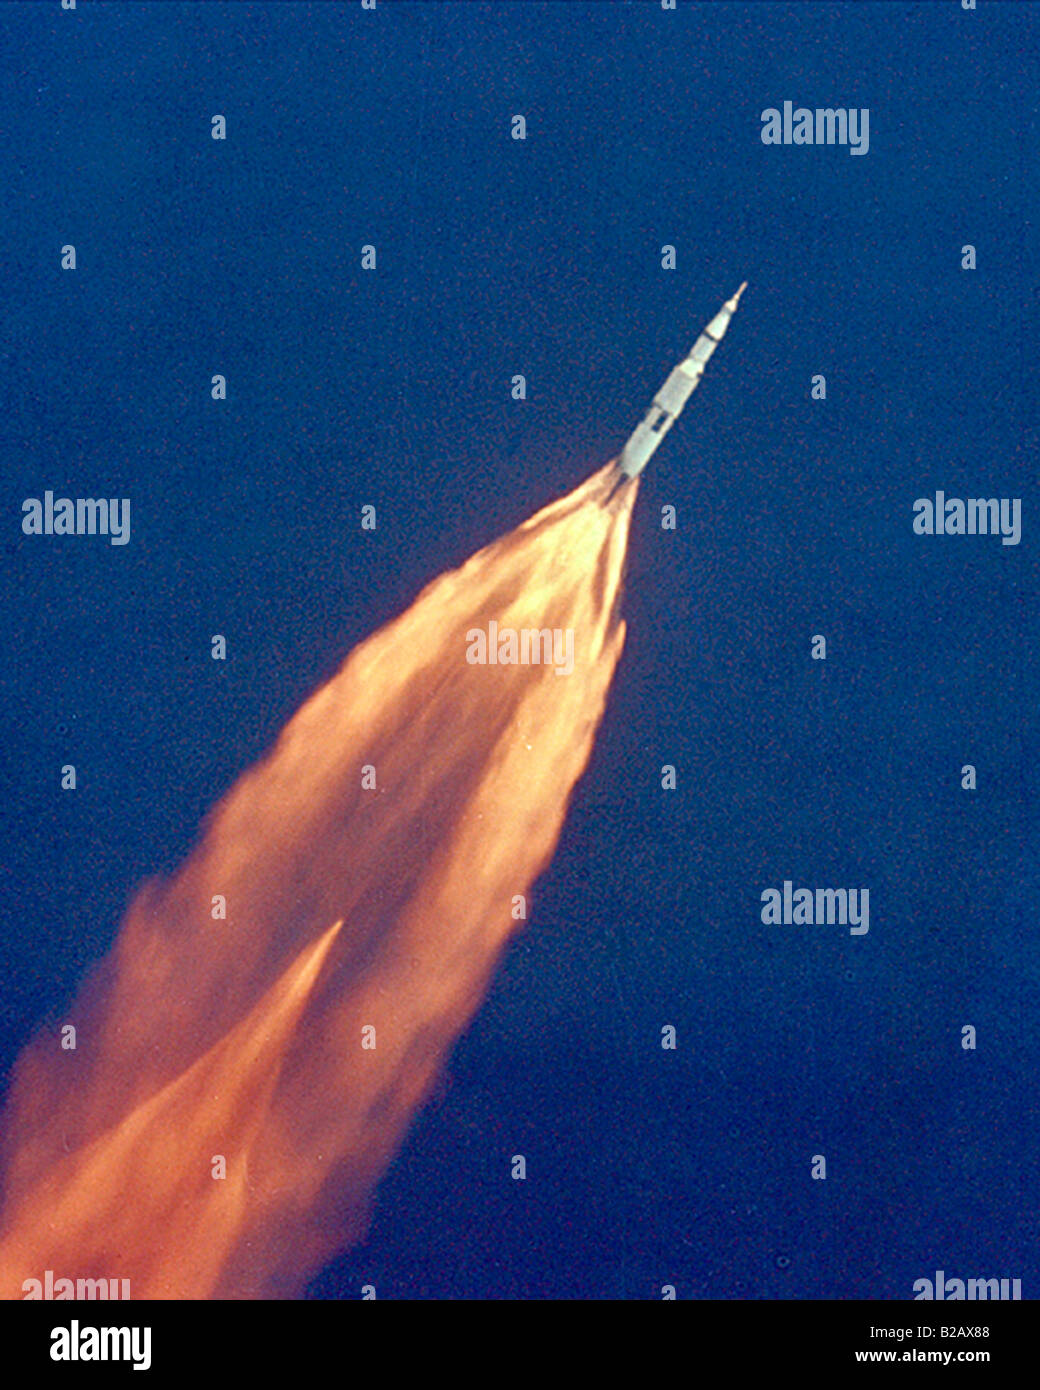 launch of  Apollo 11 Lunar Landing Mission to the moon Stock Photo